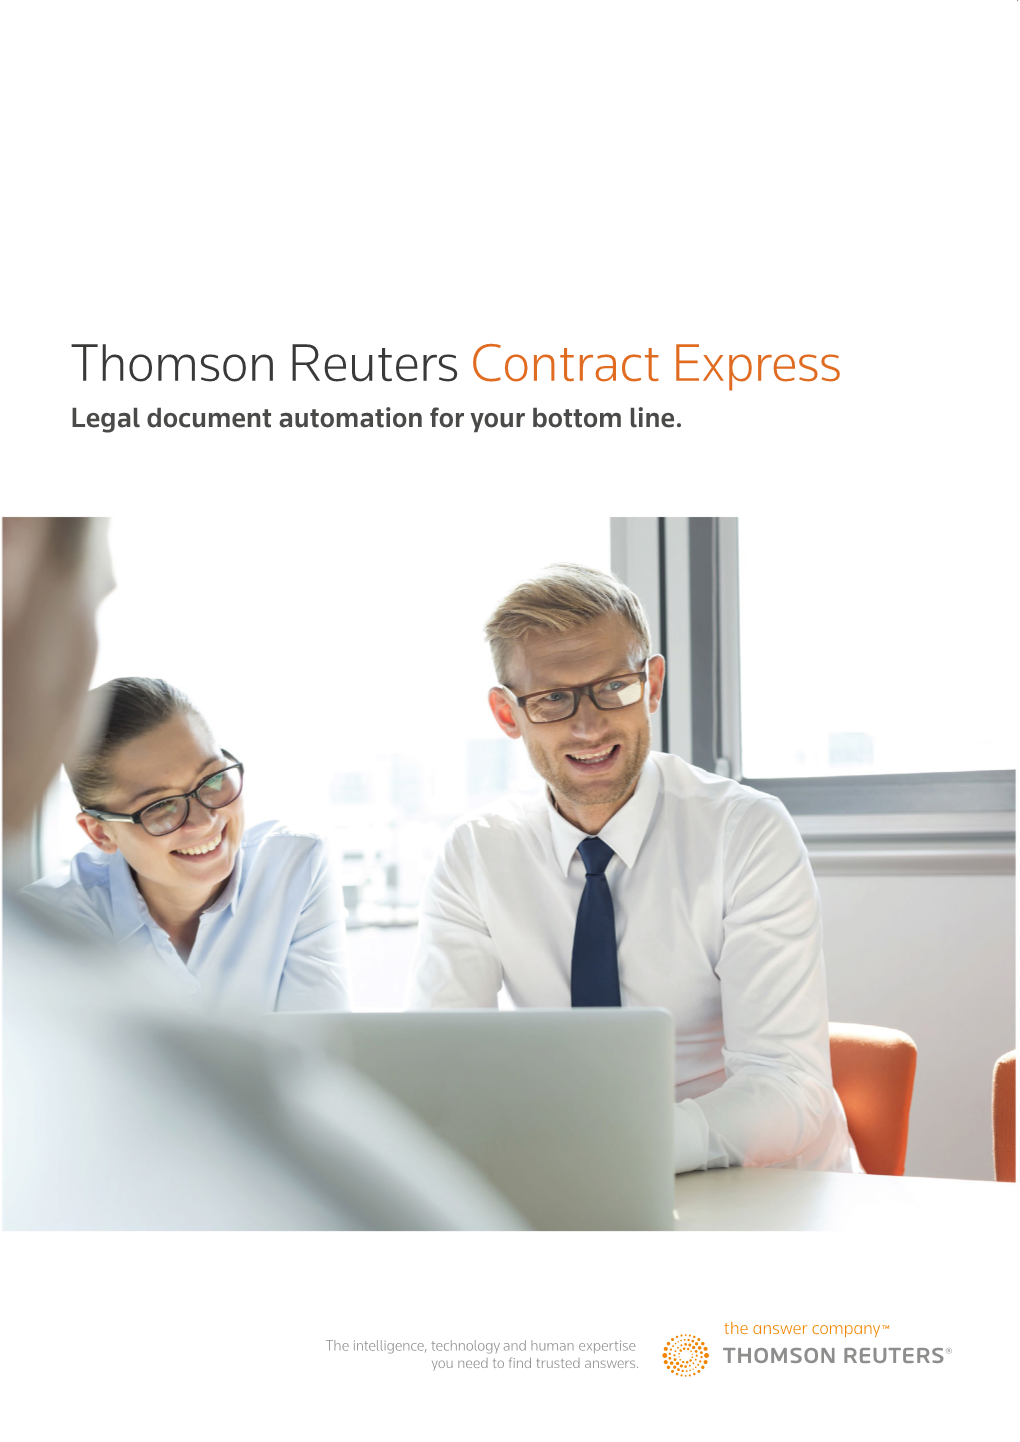 Contract Express Legal Document Automation for Your Bottom Line